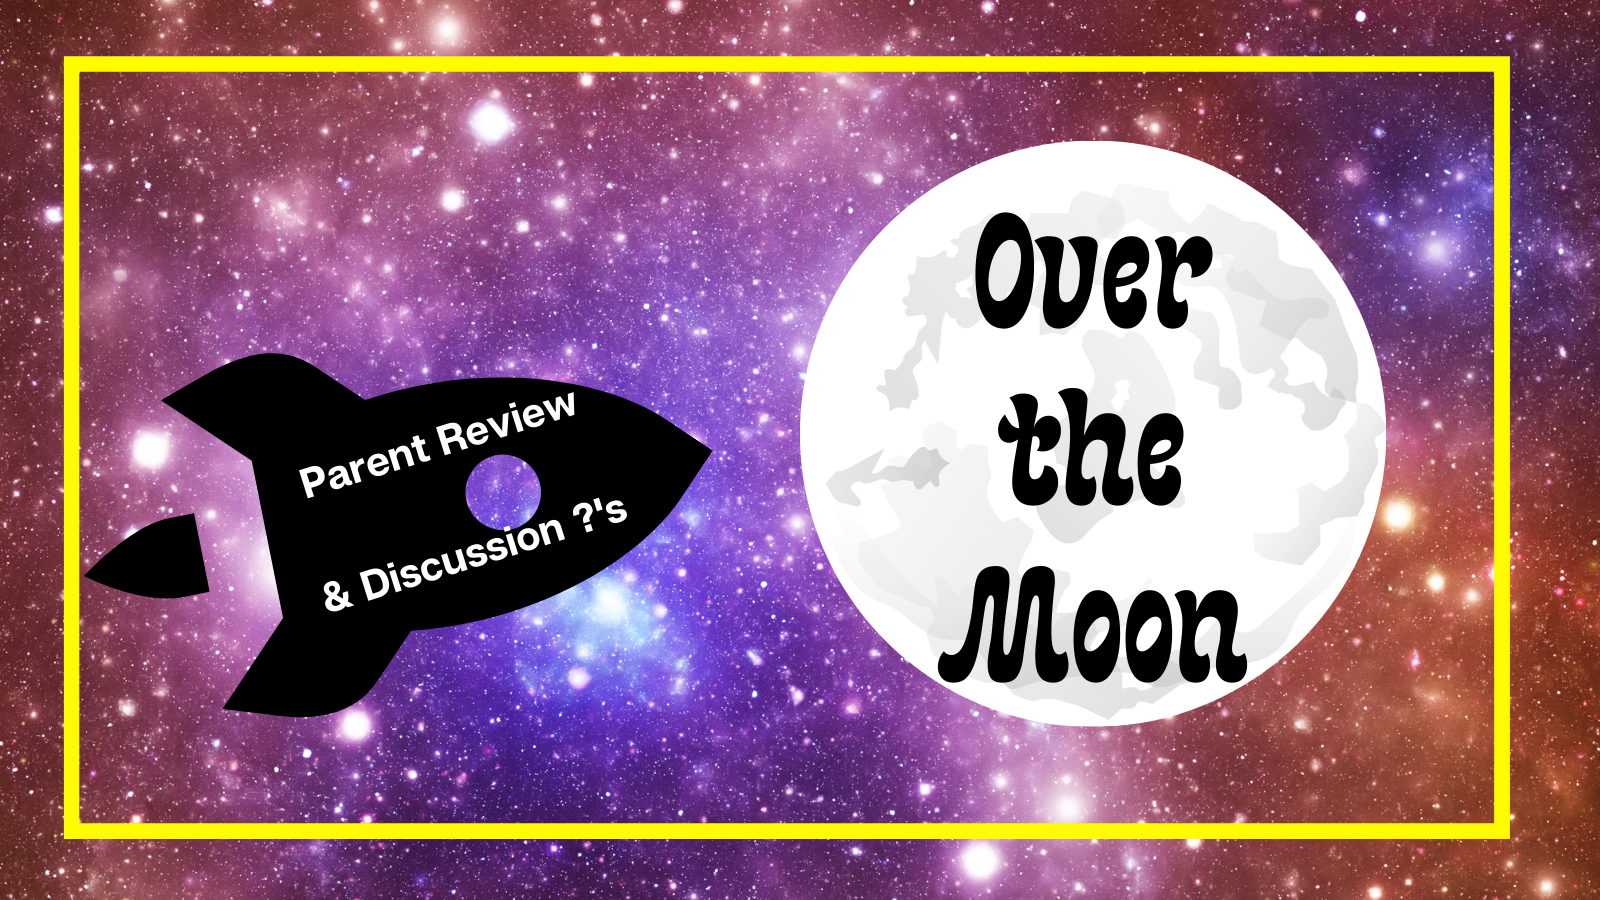 Over the Moon Review and discussion questions